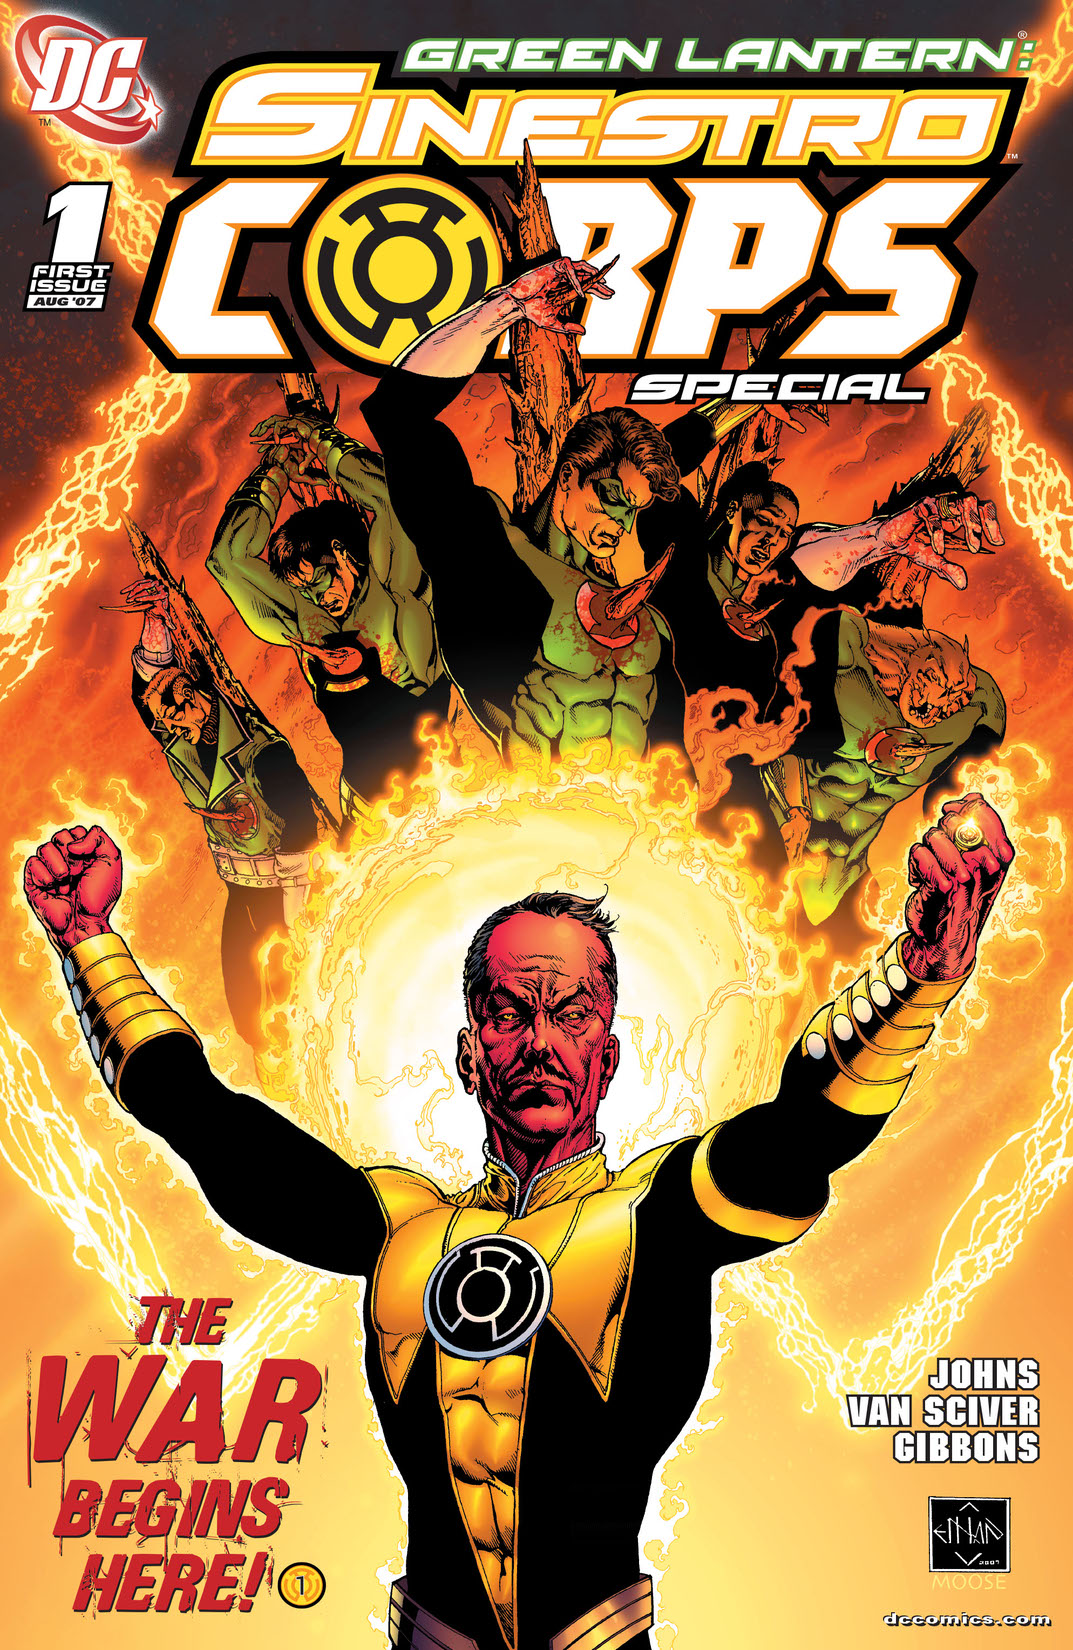 Green Lantern: Sinestro Corps War Special #1 preview images